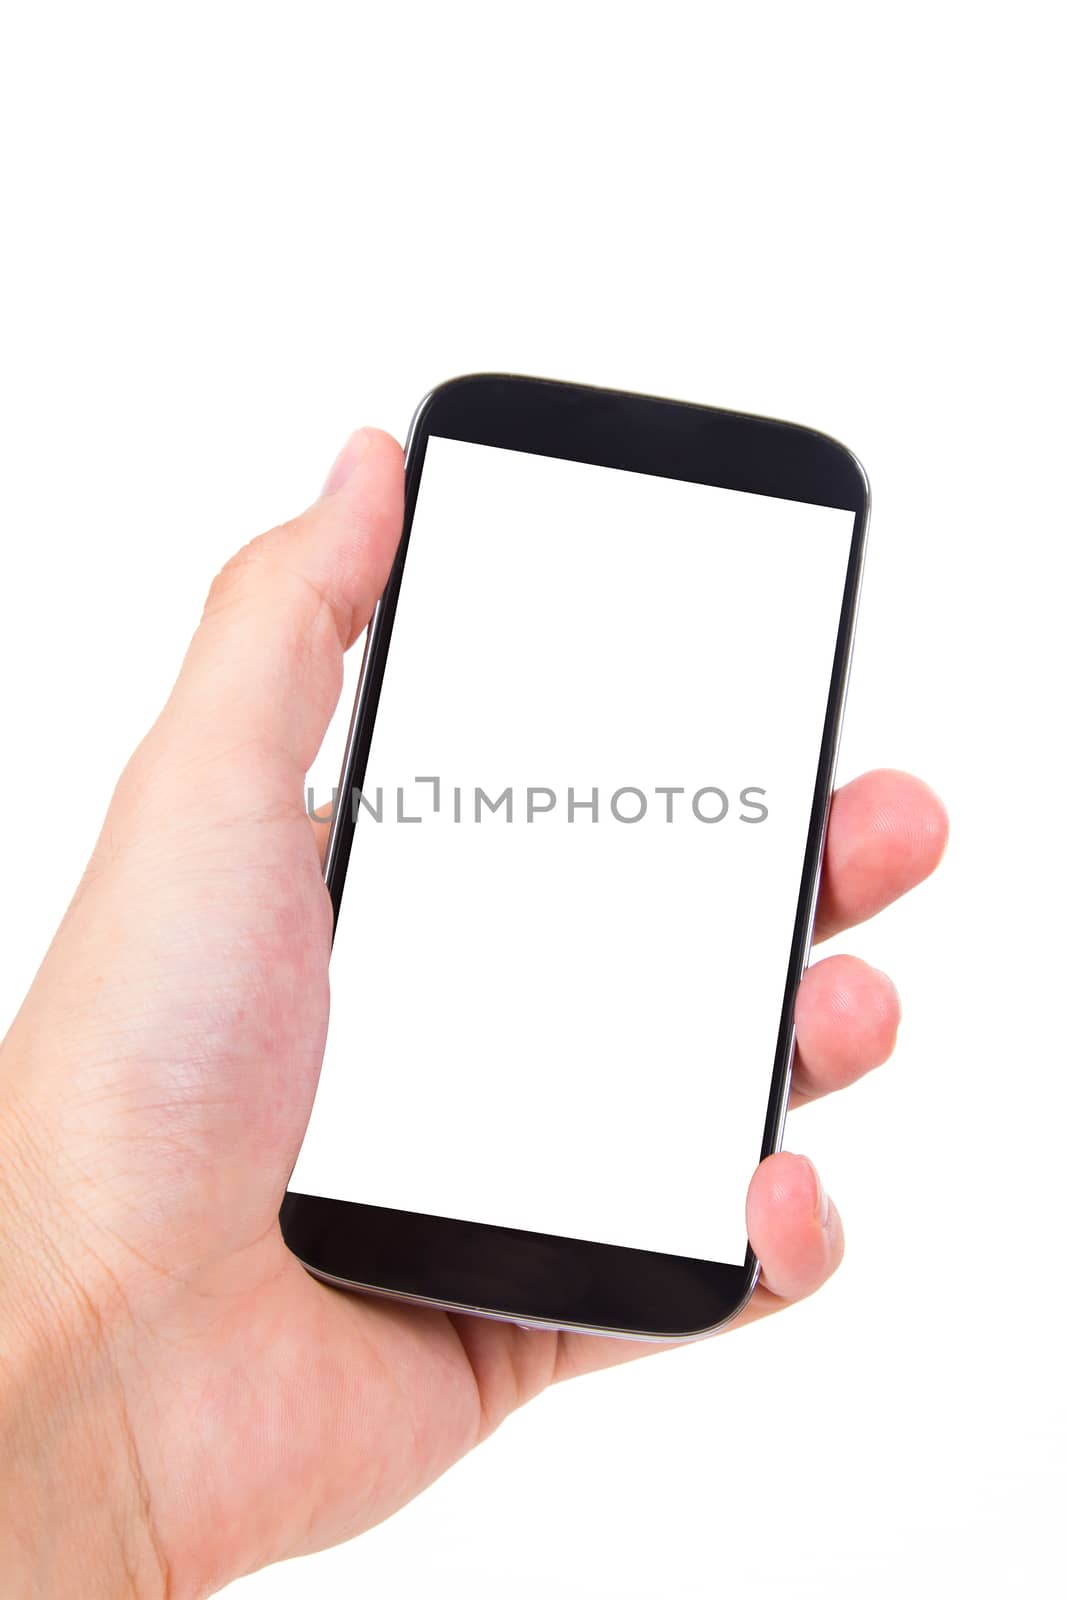 Hand holding and showing mobile phone with blank, white screen, front view, isolated on white background.